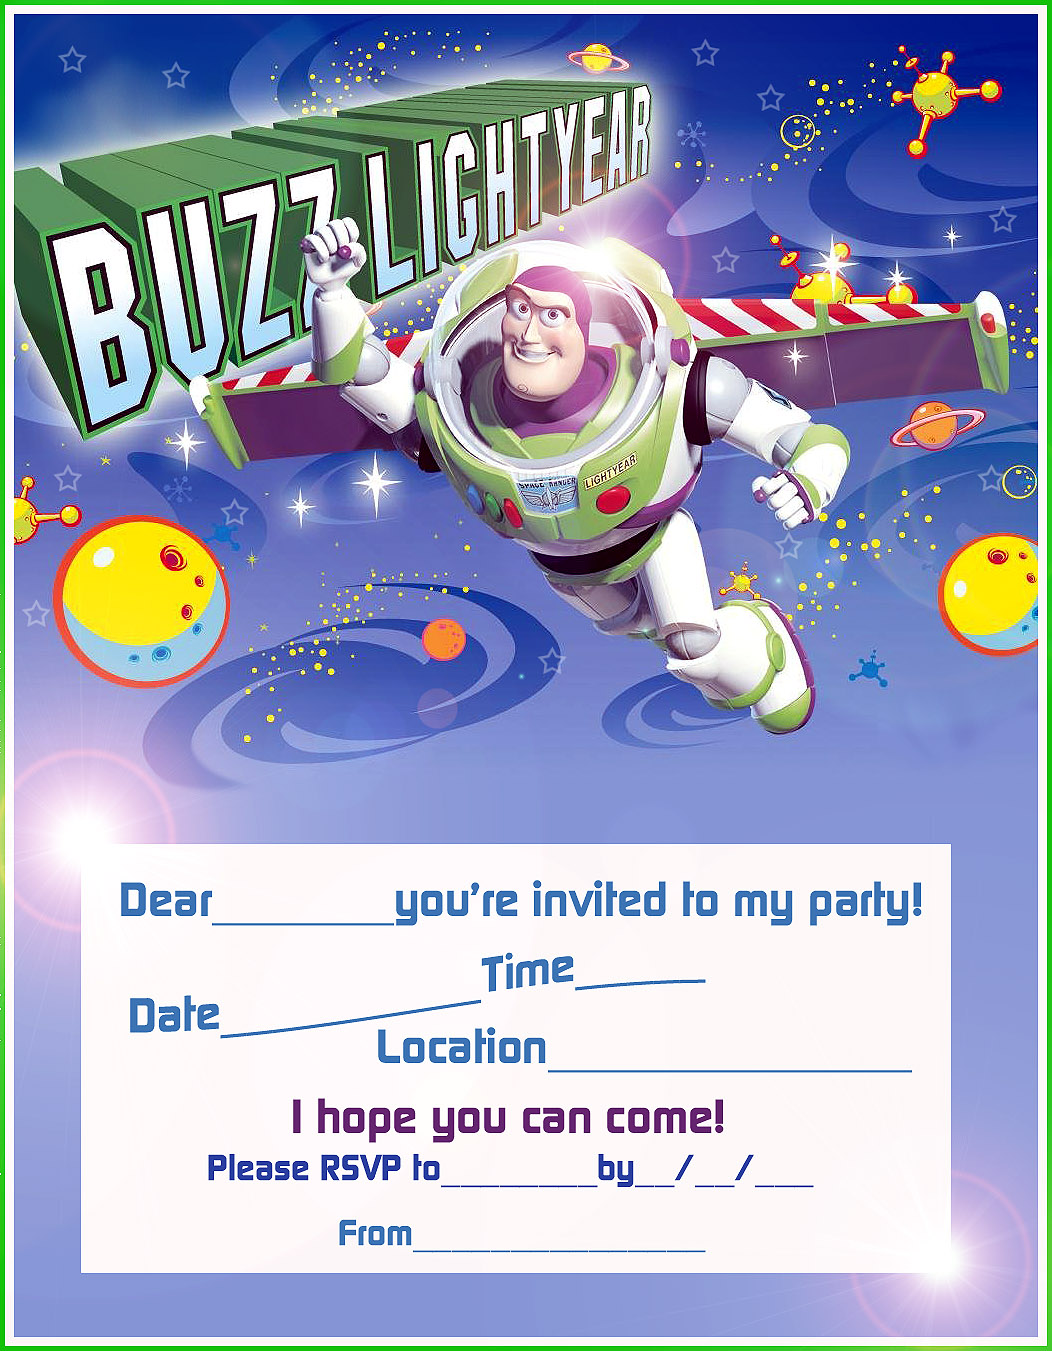 free-toy-story-woody-and-buzz-lightyear-party-invitation-printable